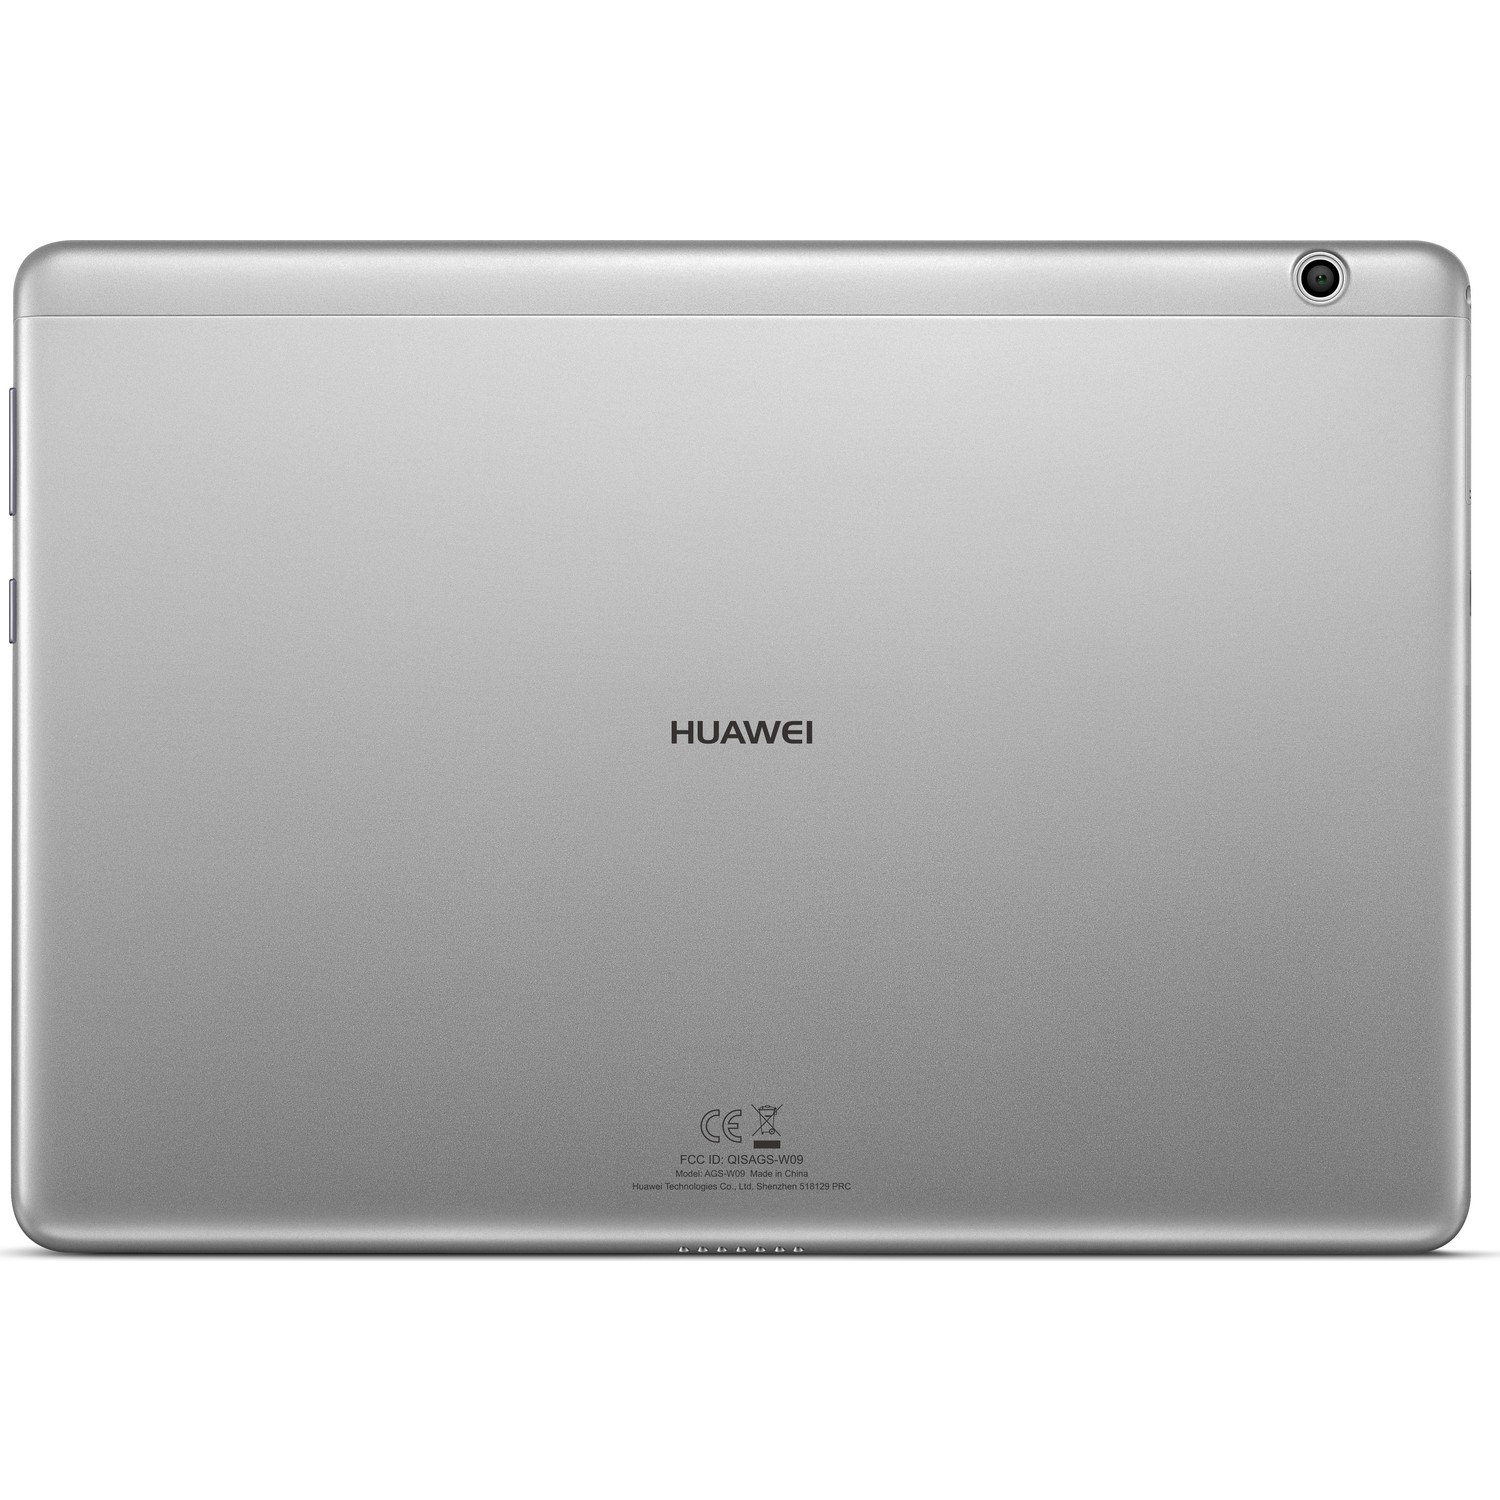 HUAWEI T3 10 AGASSI W09 MSM 8917 A53 2GB DDR3 32 GB WIFI 10" 1280x800 IPS HD GRI ANDROID 7.0 NOUGAT